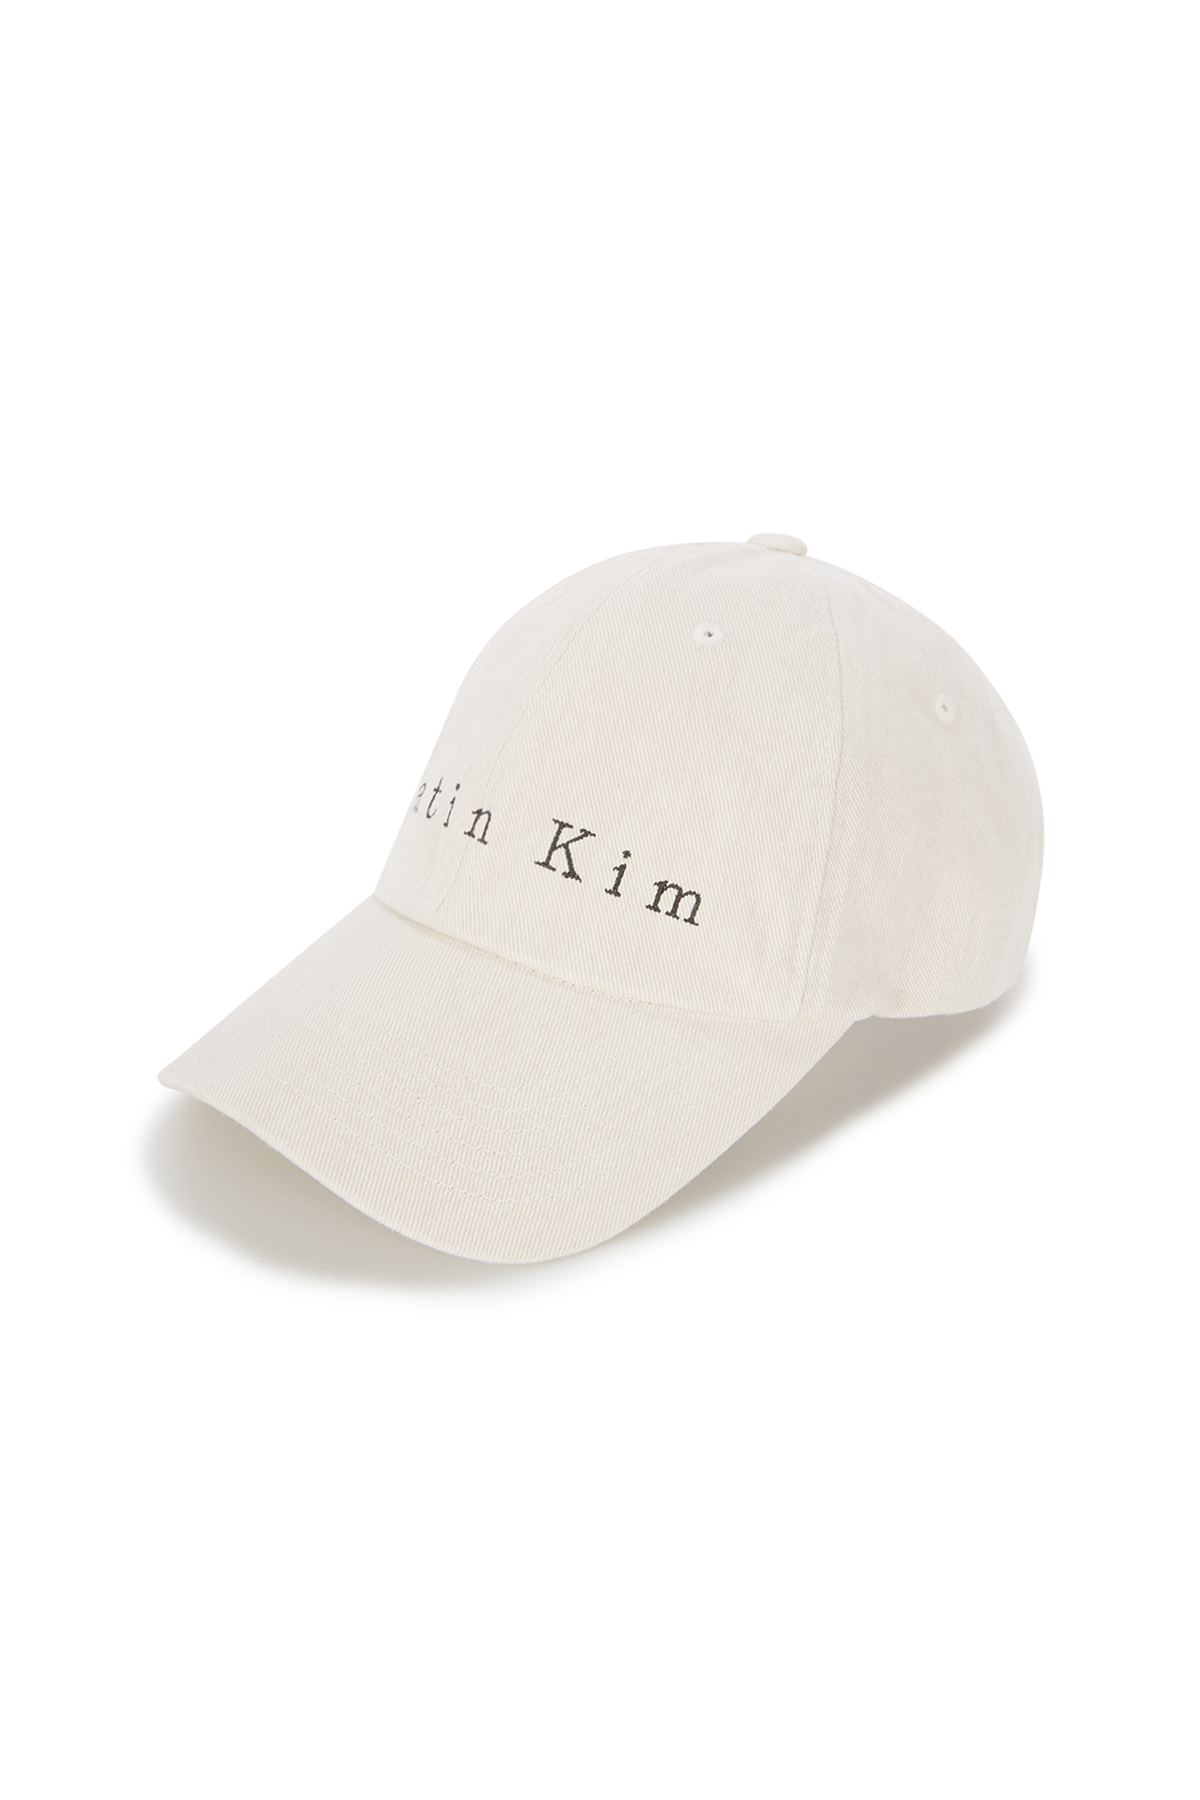 MATIN COTTON WASHED BALL CAP IN LIGHT BEIGE